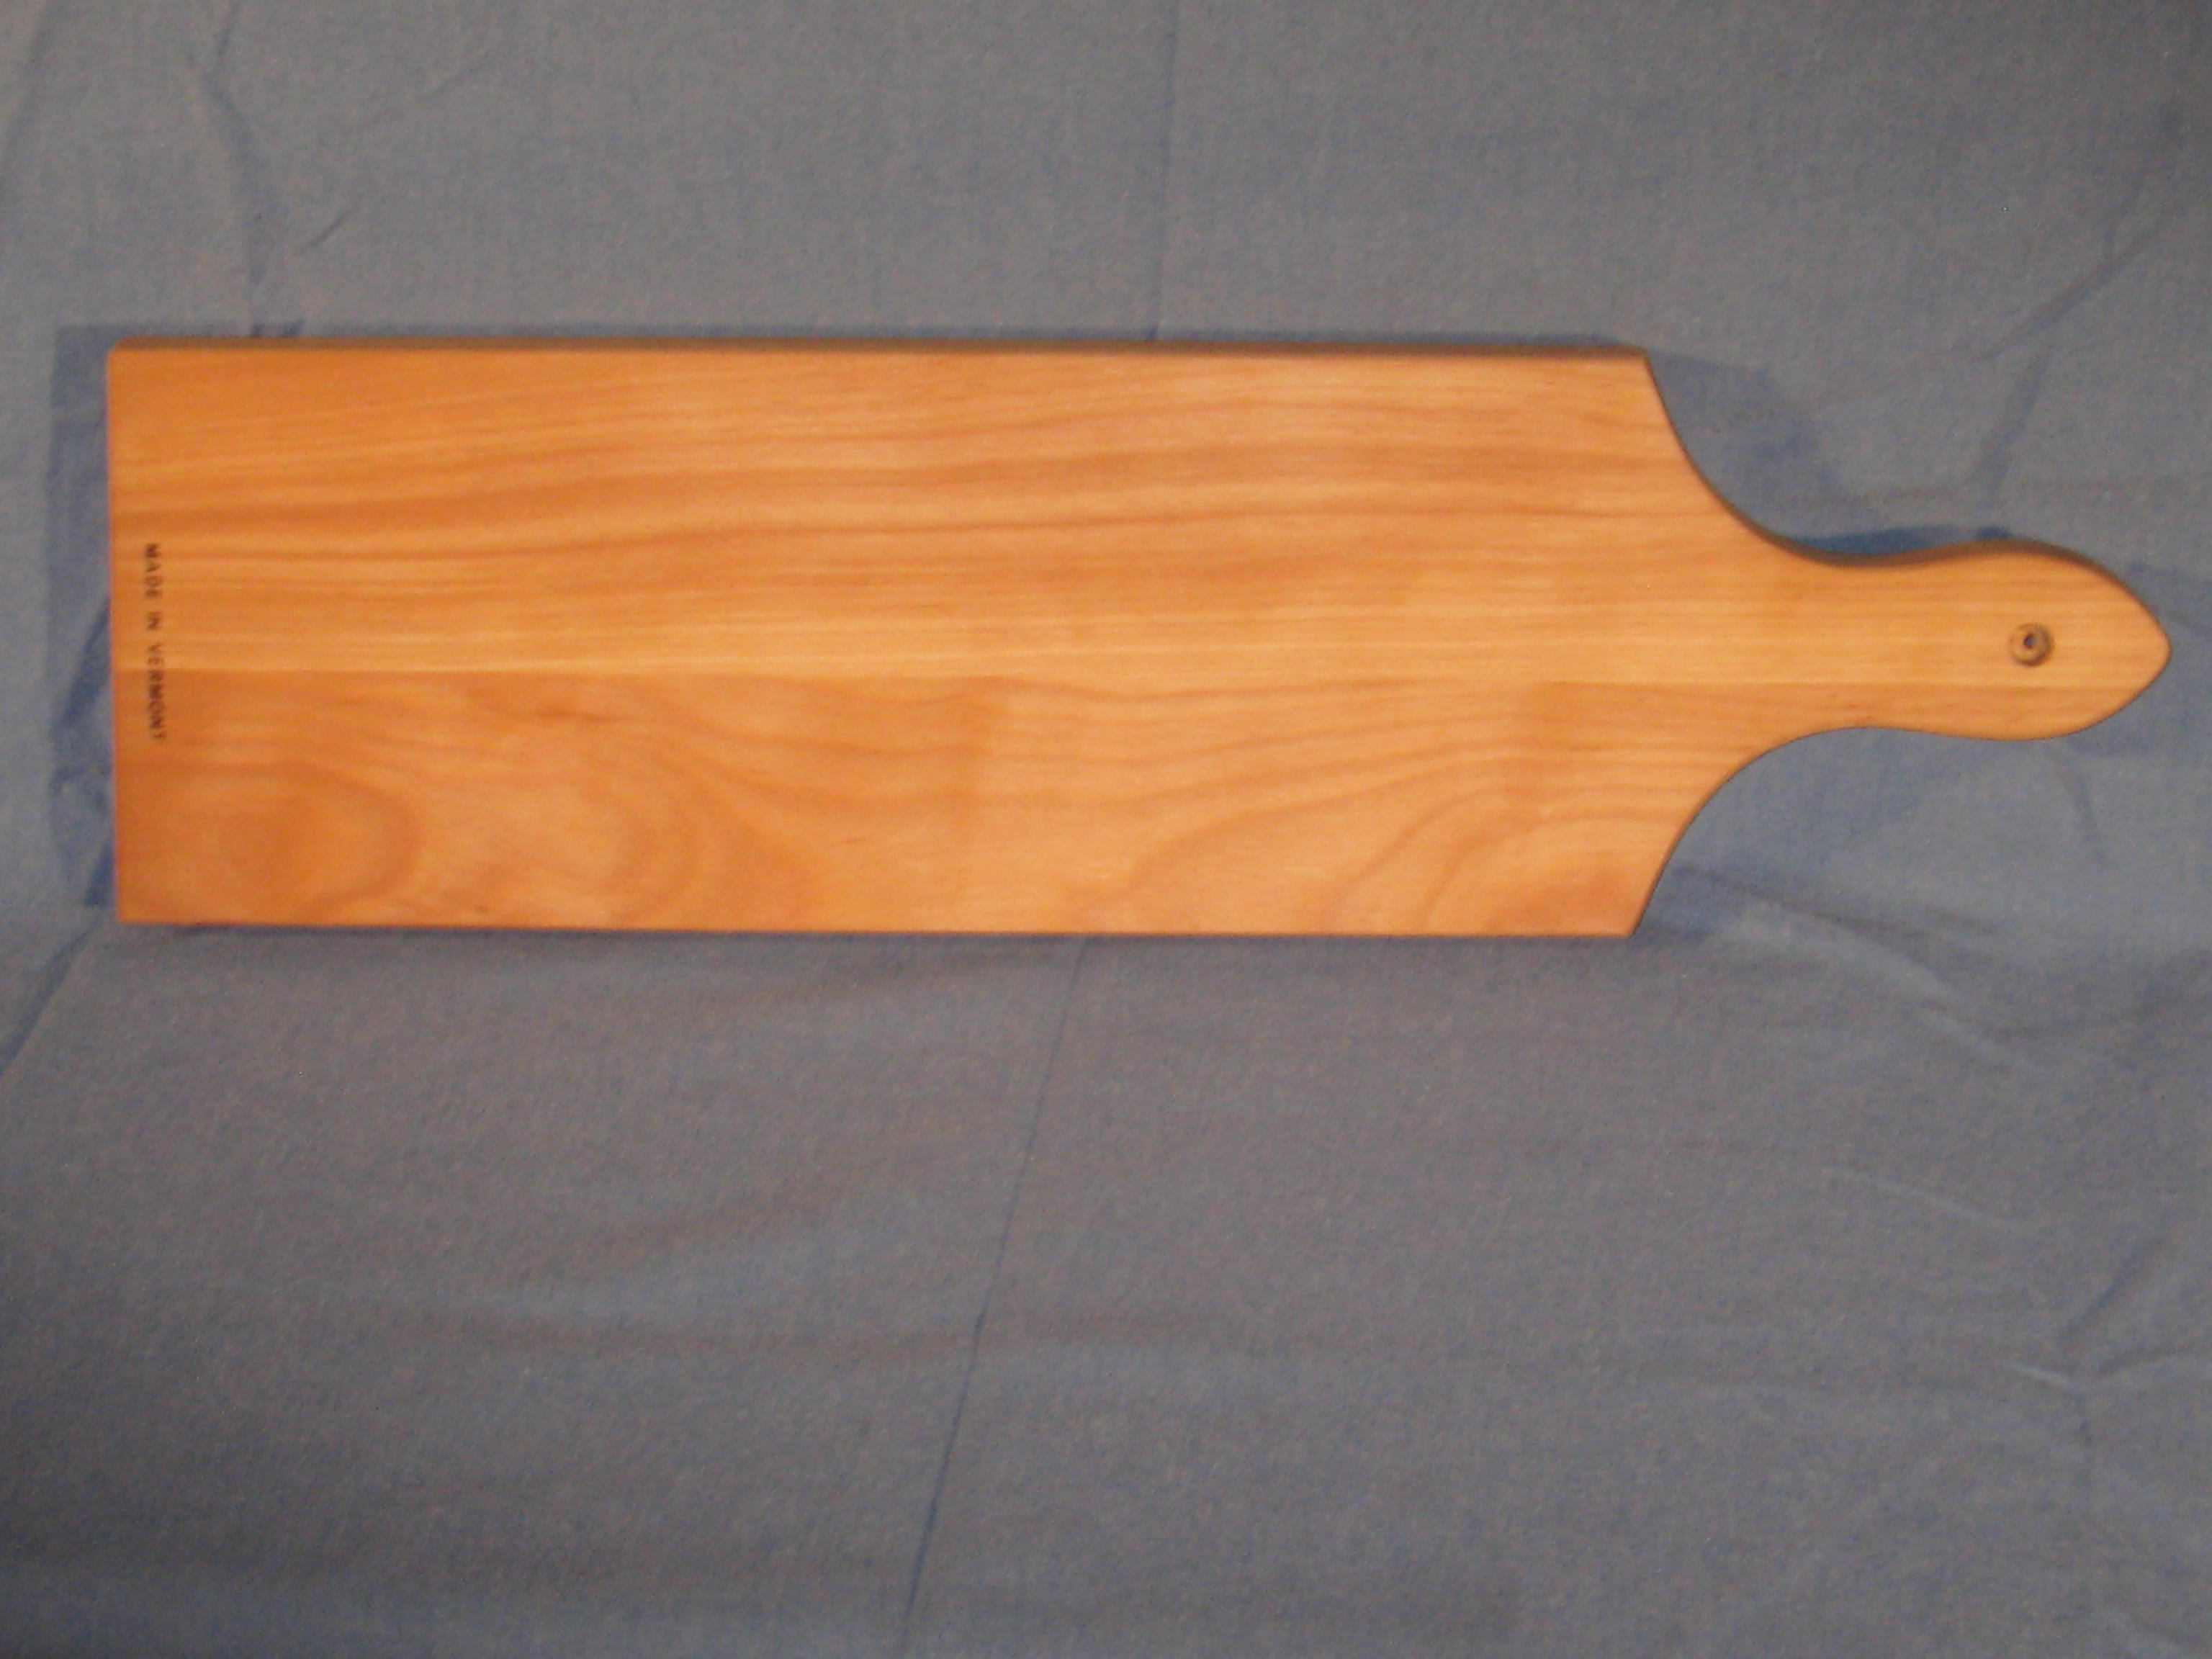 MEDIUM FRENCH BREAD BOARD WITH HANDLE